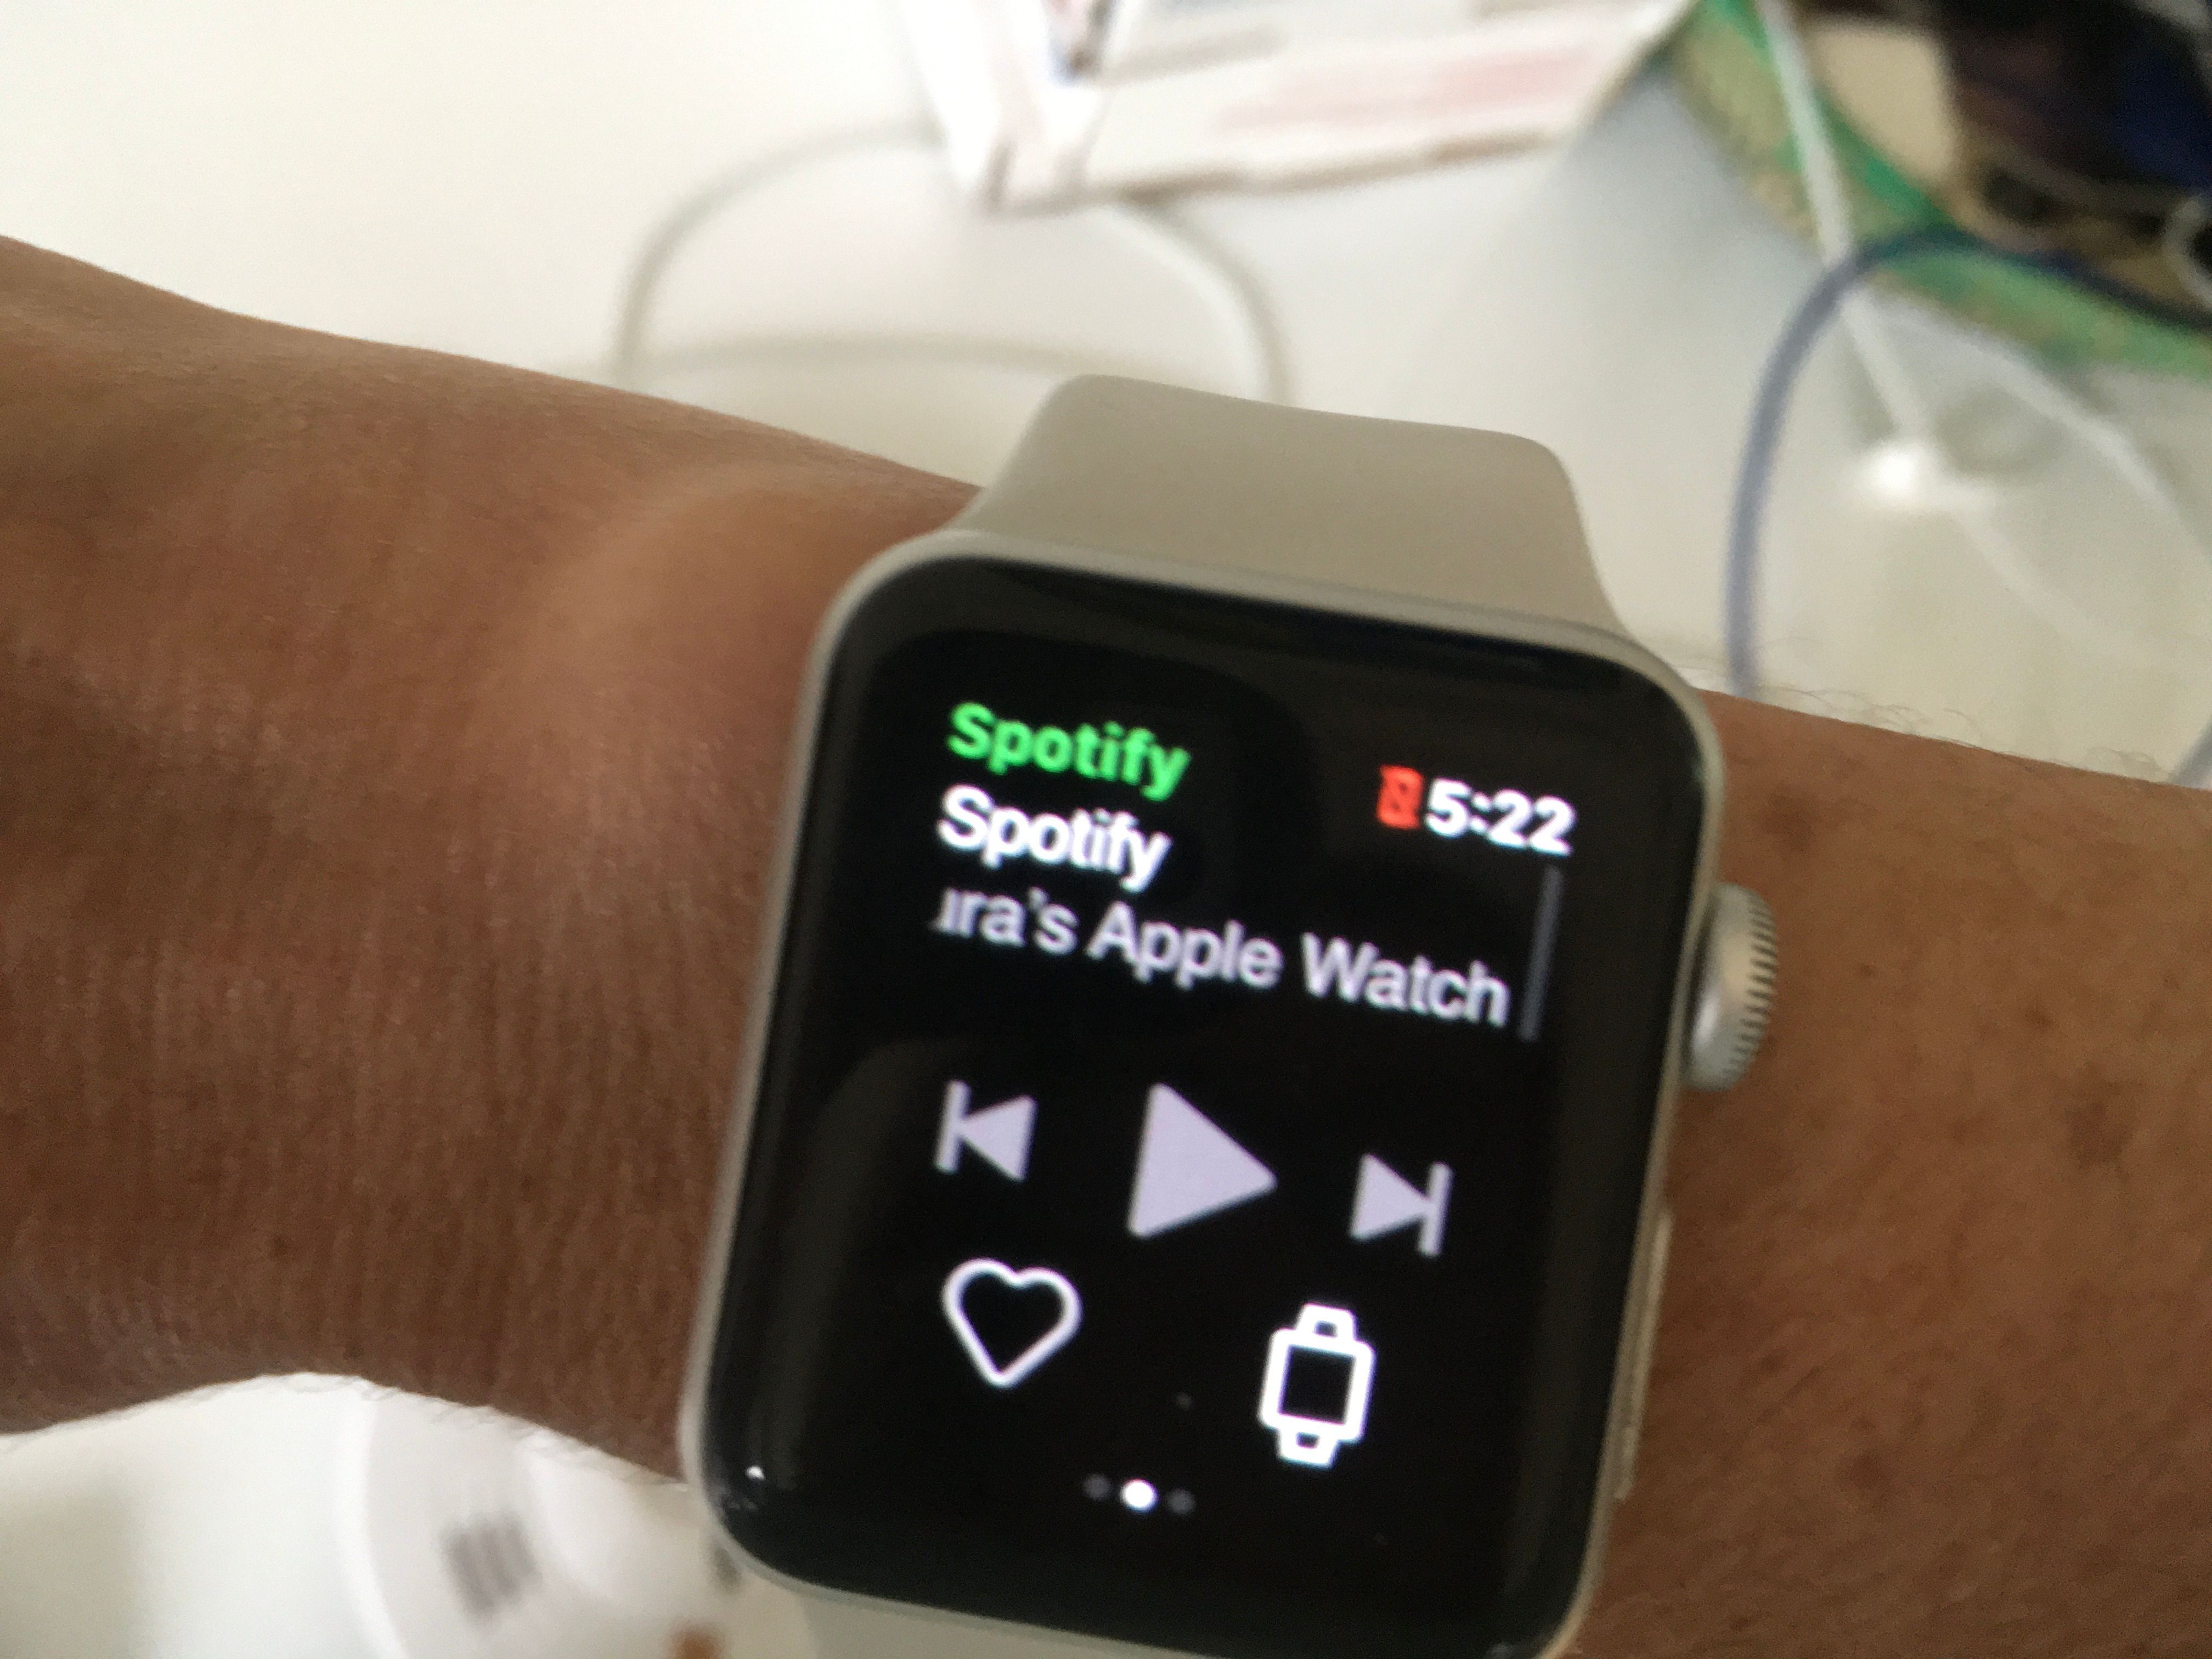 Spotify on Apple Watch doesn't work anymore - The Spotify Community